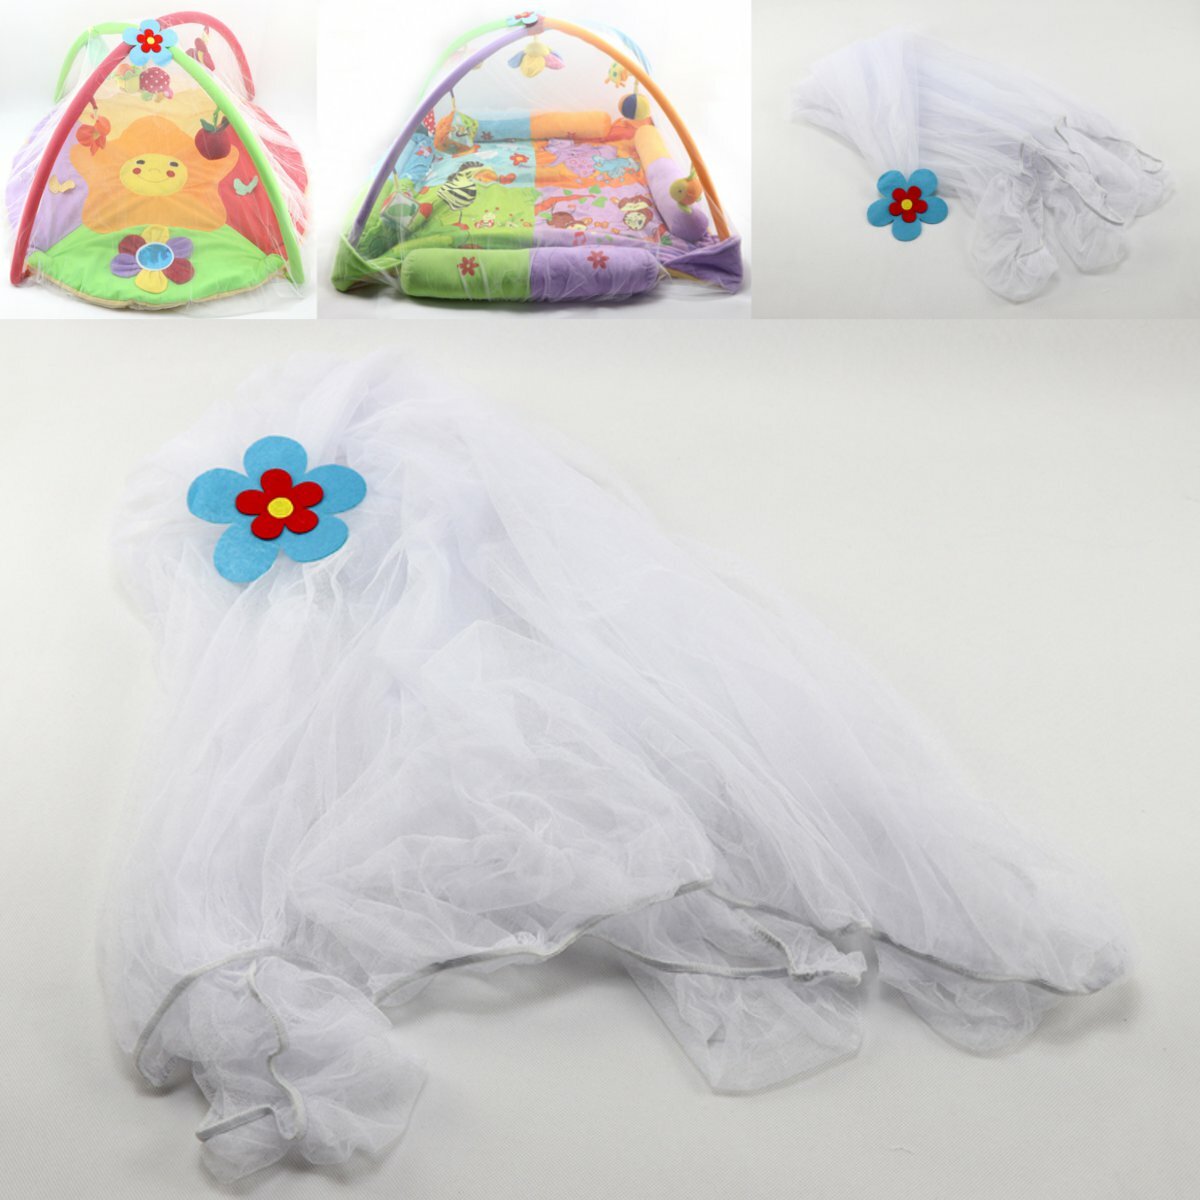 Baby Infant Nursery Bed Game Blanket Crib Canopy Mosquito Net Netting Game Blankets with a Dedicated